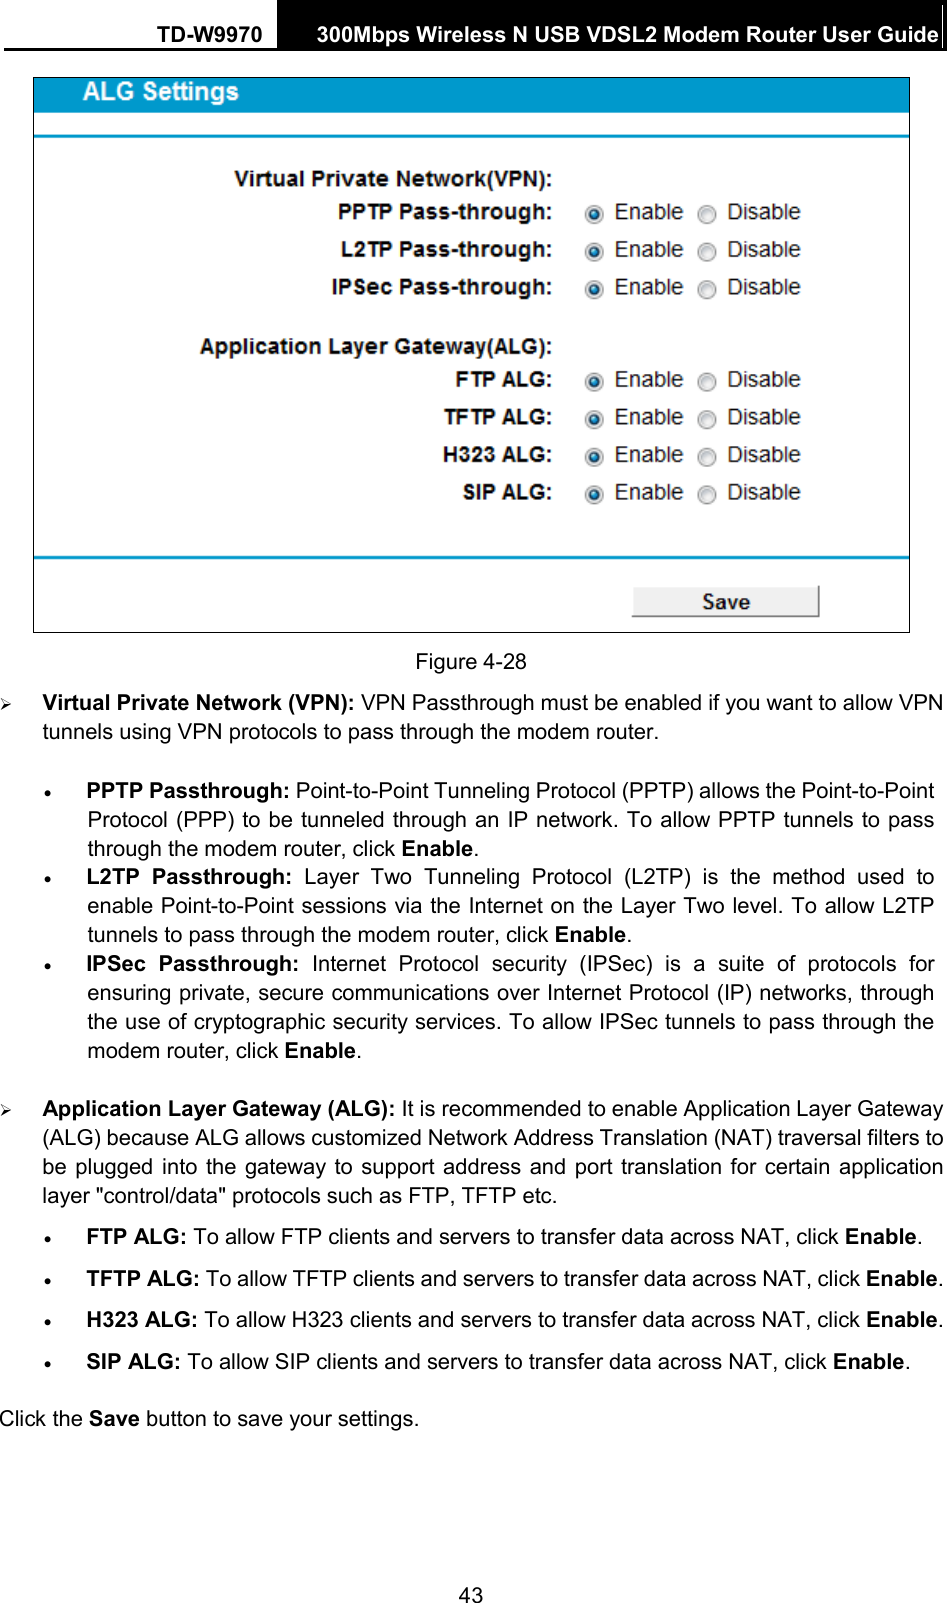 TD-W9970 300Mbps Wireless N USB VDSL2 Modem Router User Guide   Figure 4-28  Virtual Private Network (VPN): VPN Passthrough must be enabled if you want to allow VPN tunnels using VPN protocols to pass through the modem router. • PPTP Passthrough: Point-to-Point Tunneling Protocol (PPTP) allows the Point-to-Point Protocol (PPP) to be tunneled through an IP network. To allow PPTP tunnels to pass through the modem router, click Enable. • L2TP Passthrough: Layer Two Tunneling Protocol (L2TP) is the method used to enable Point-to-Point sessions via the Internet on the Layer Two level. To allow L2TP tunnels to pass through the modem router, click Enable. • IPSec Passthrough: Internet Protocol security (IPSec) is a suite of protocols for ensuring private, secure communications over Internet Protocol (IP) networks, through the use of cryptographic security services. To allow IPSec tunnels to pass through the modem router, click Enable.  Application Layer Gateway (ALG): It is recommended to enable Application Layer Gateway (ALG) because ALG allows customized Network Address Translation (NAT) traversal filters to be plugged into the gateway to support address and port translation for certain application layer &quot;control/data&quot; protocols such as FTP, TFTP etc.   • FTP ALG: To allow FTP clients and servers to transfer data across NAT, click Enable. • TFTP ALG: To allow TFTP clients and servers to transfer data across NAT, click Enable. • H323 ALG: To allow H323 clients and servers to transfer data across NAT, click Enable. • SIP ALG: To allow SIP clients and servers to transfer data across NAT, click Enable. Click the Save button to save your settings. 43 